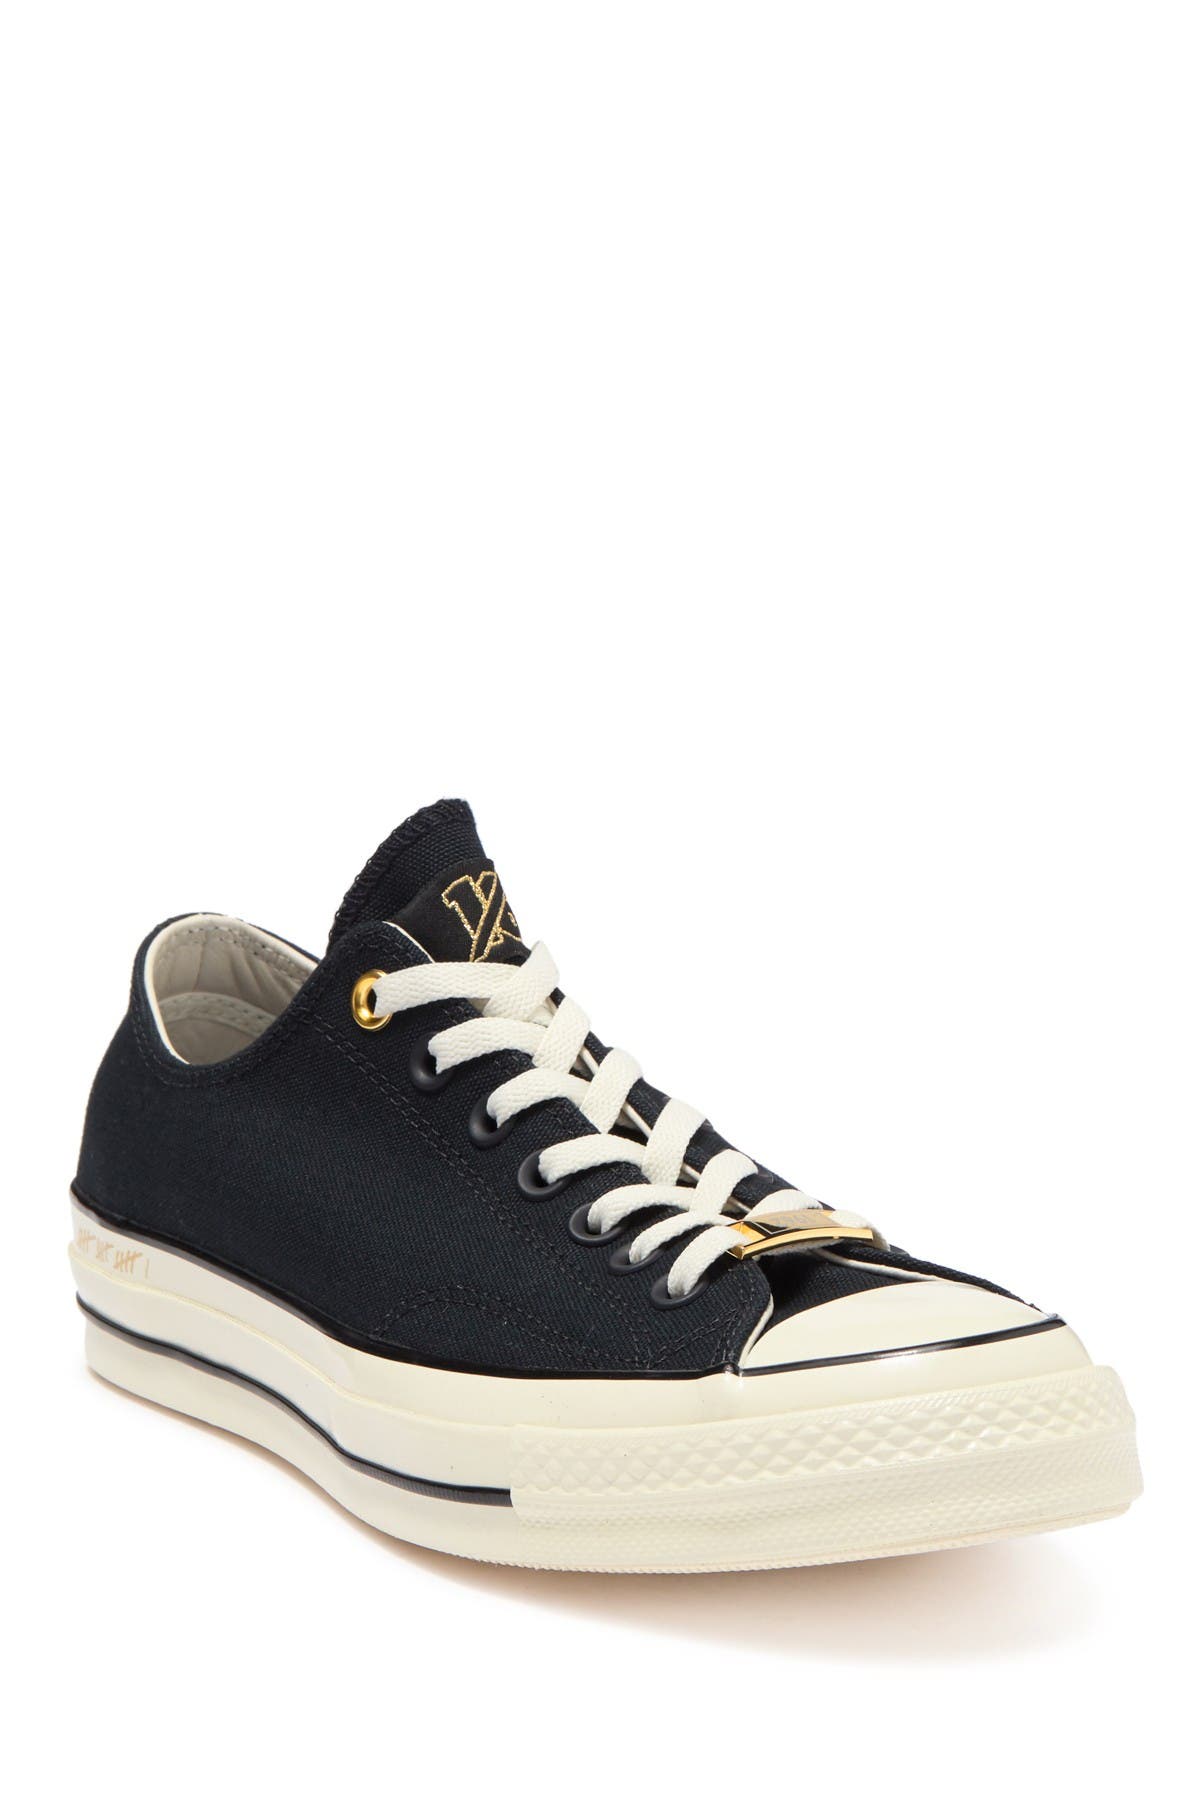 Converse | Chuck Taylor Low '30 and 40' Canvas Sneaker | Nordstrom Rack